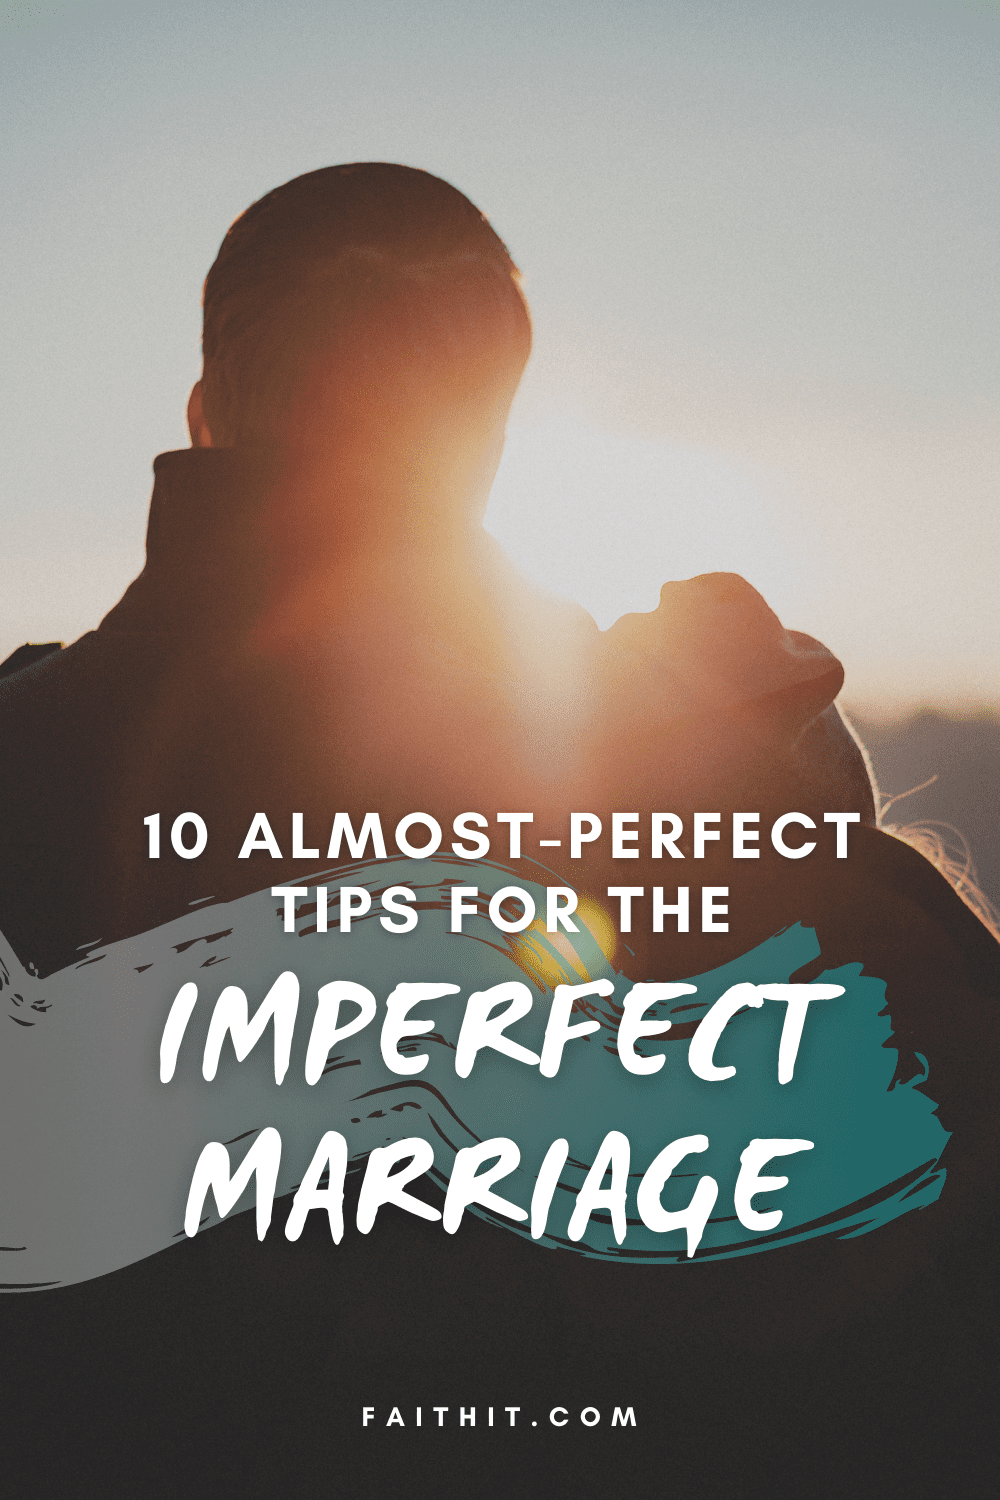 tips for an imperfect marriage